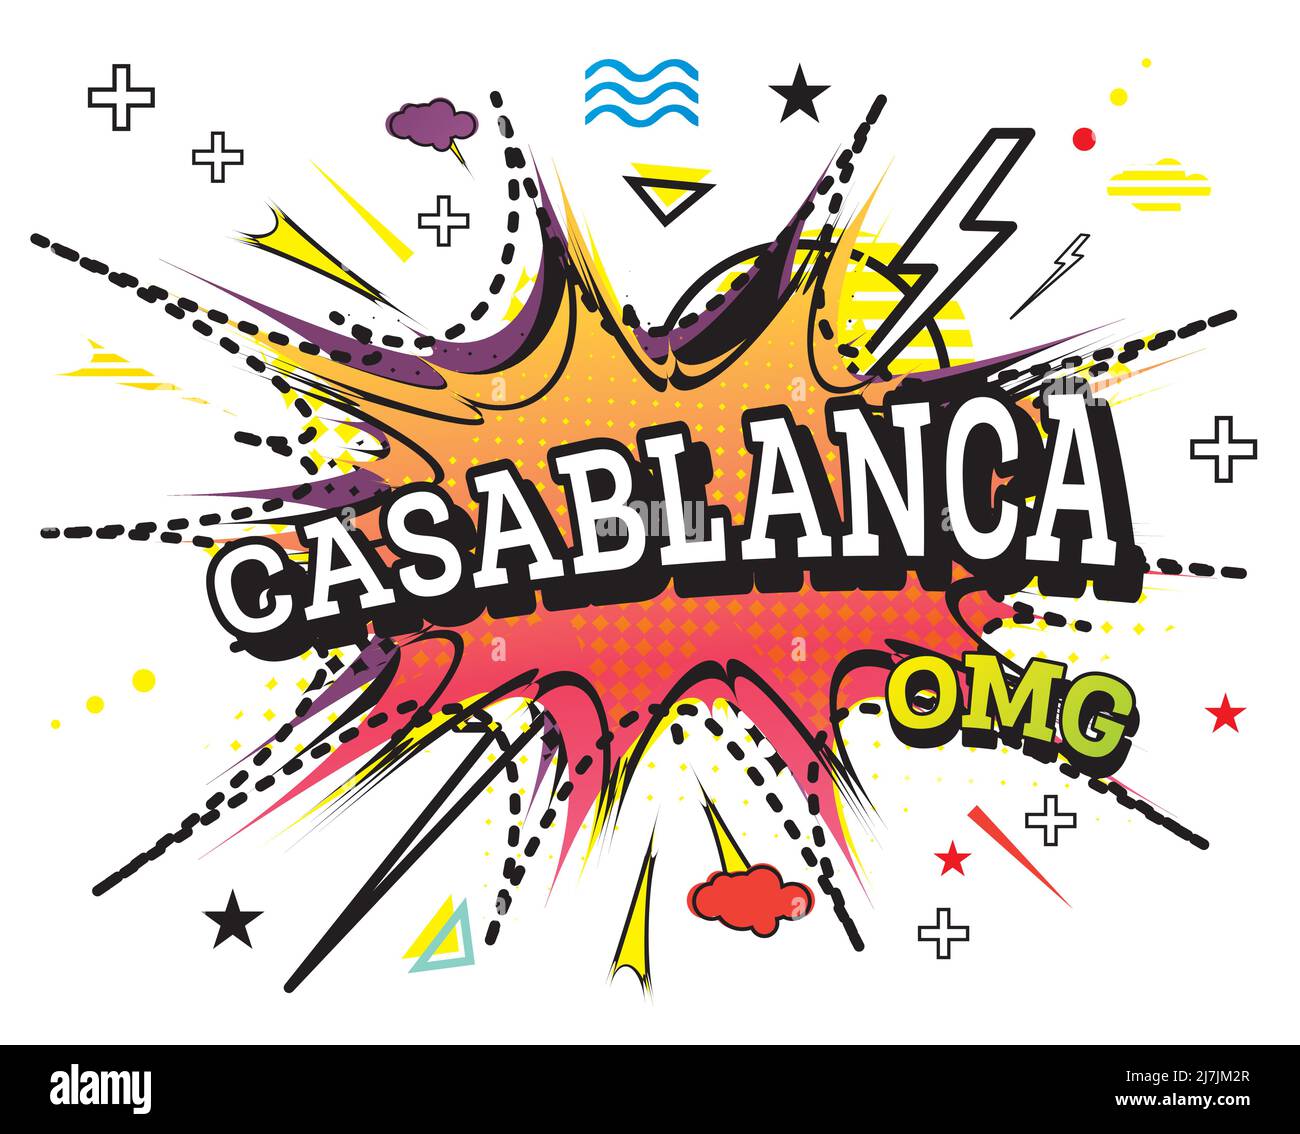 Casablanca Comic Text in Pop Art Style Isolated on White Background. Vector Illustration. Stock Vector